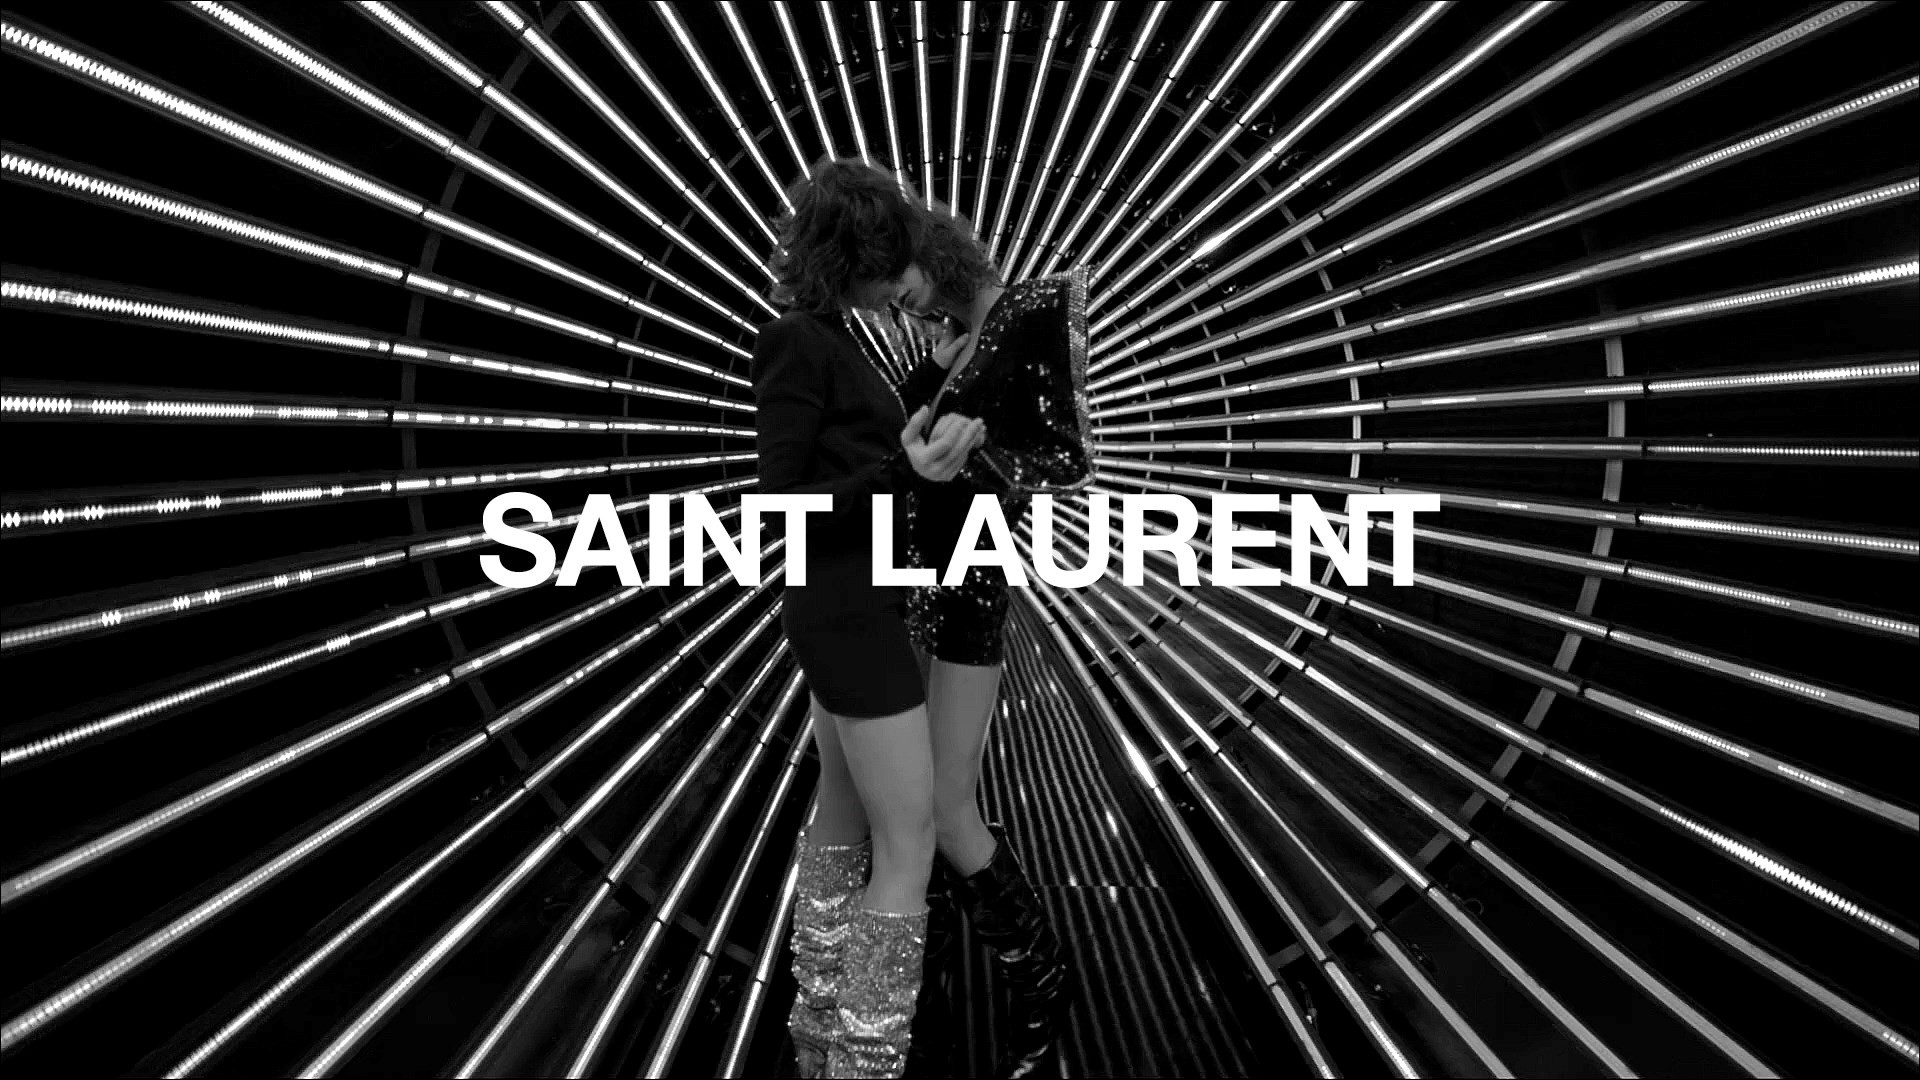 YSL Libre - Sher Shan Gallery